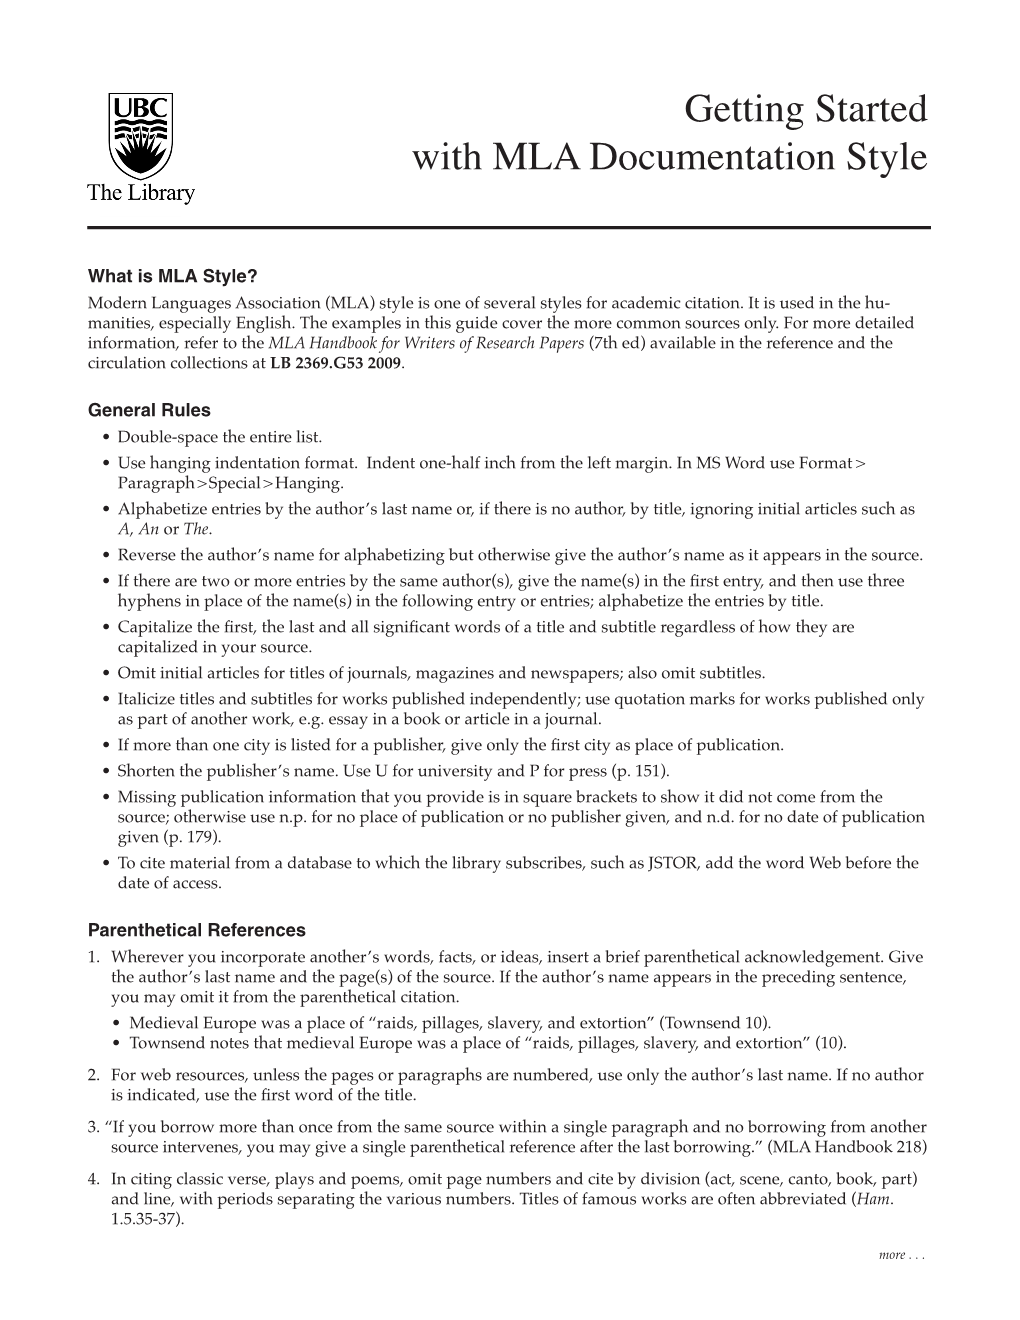 Getting Started with MLA Documentation Style